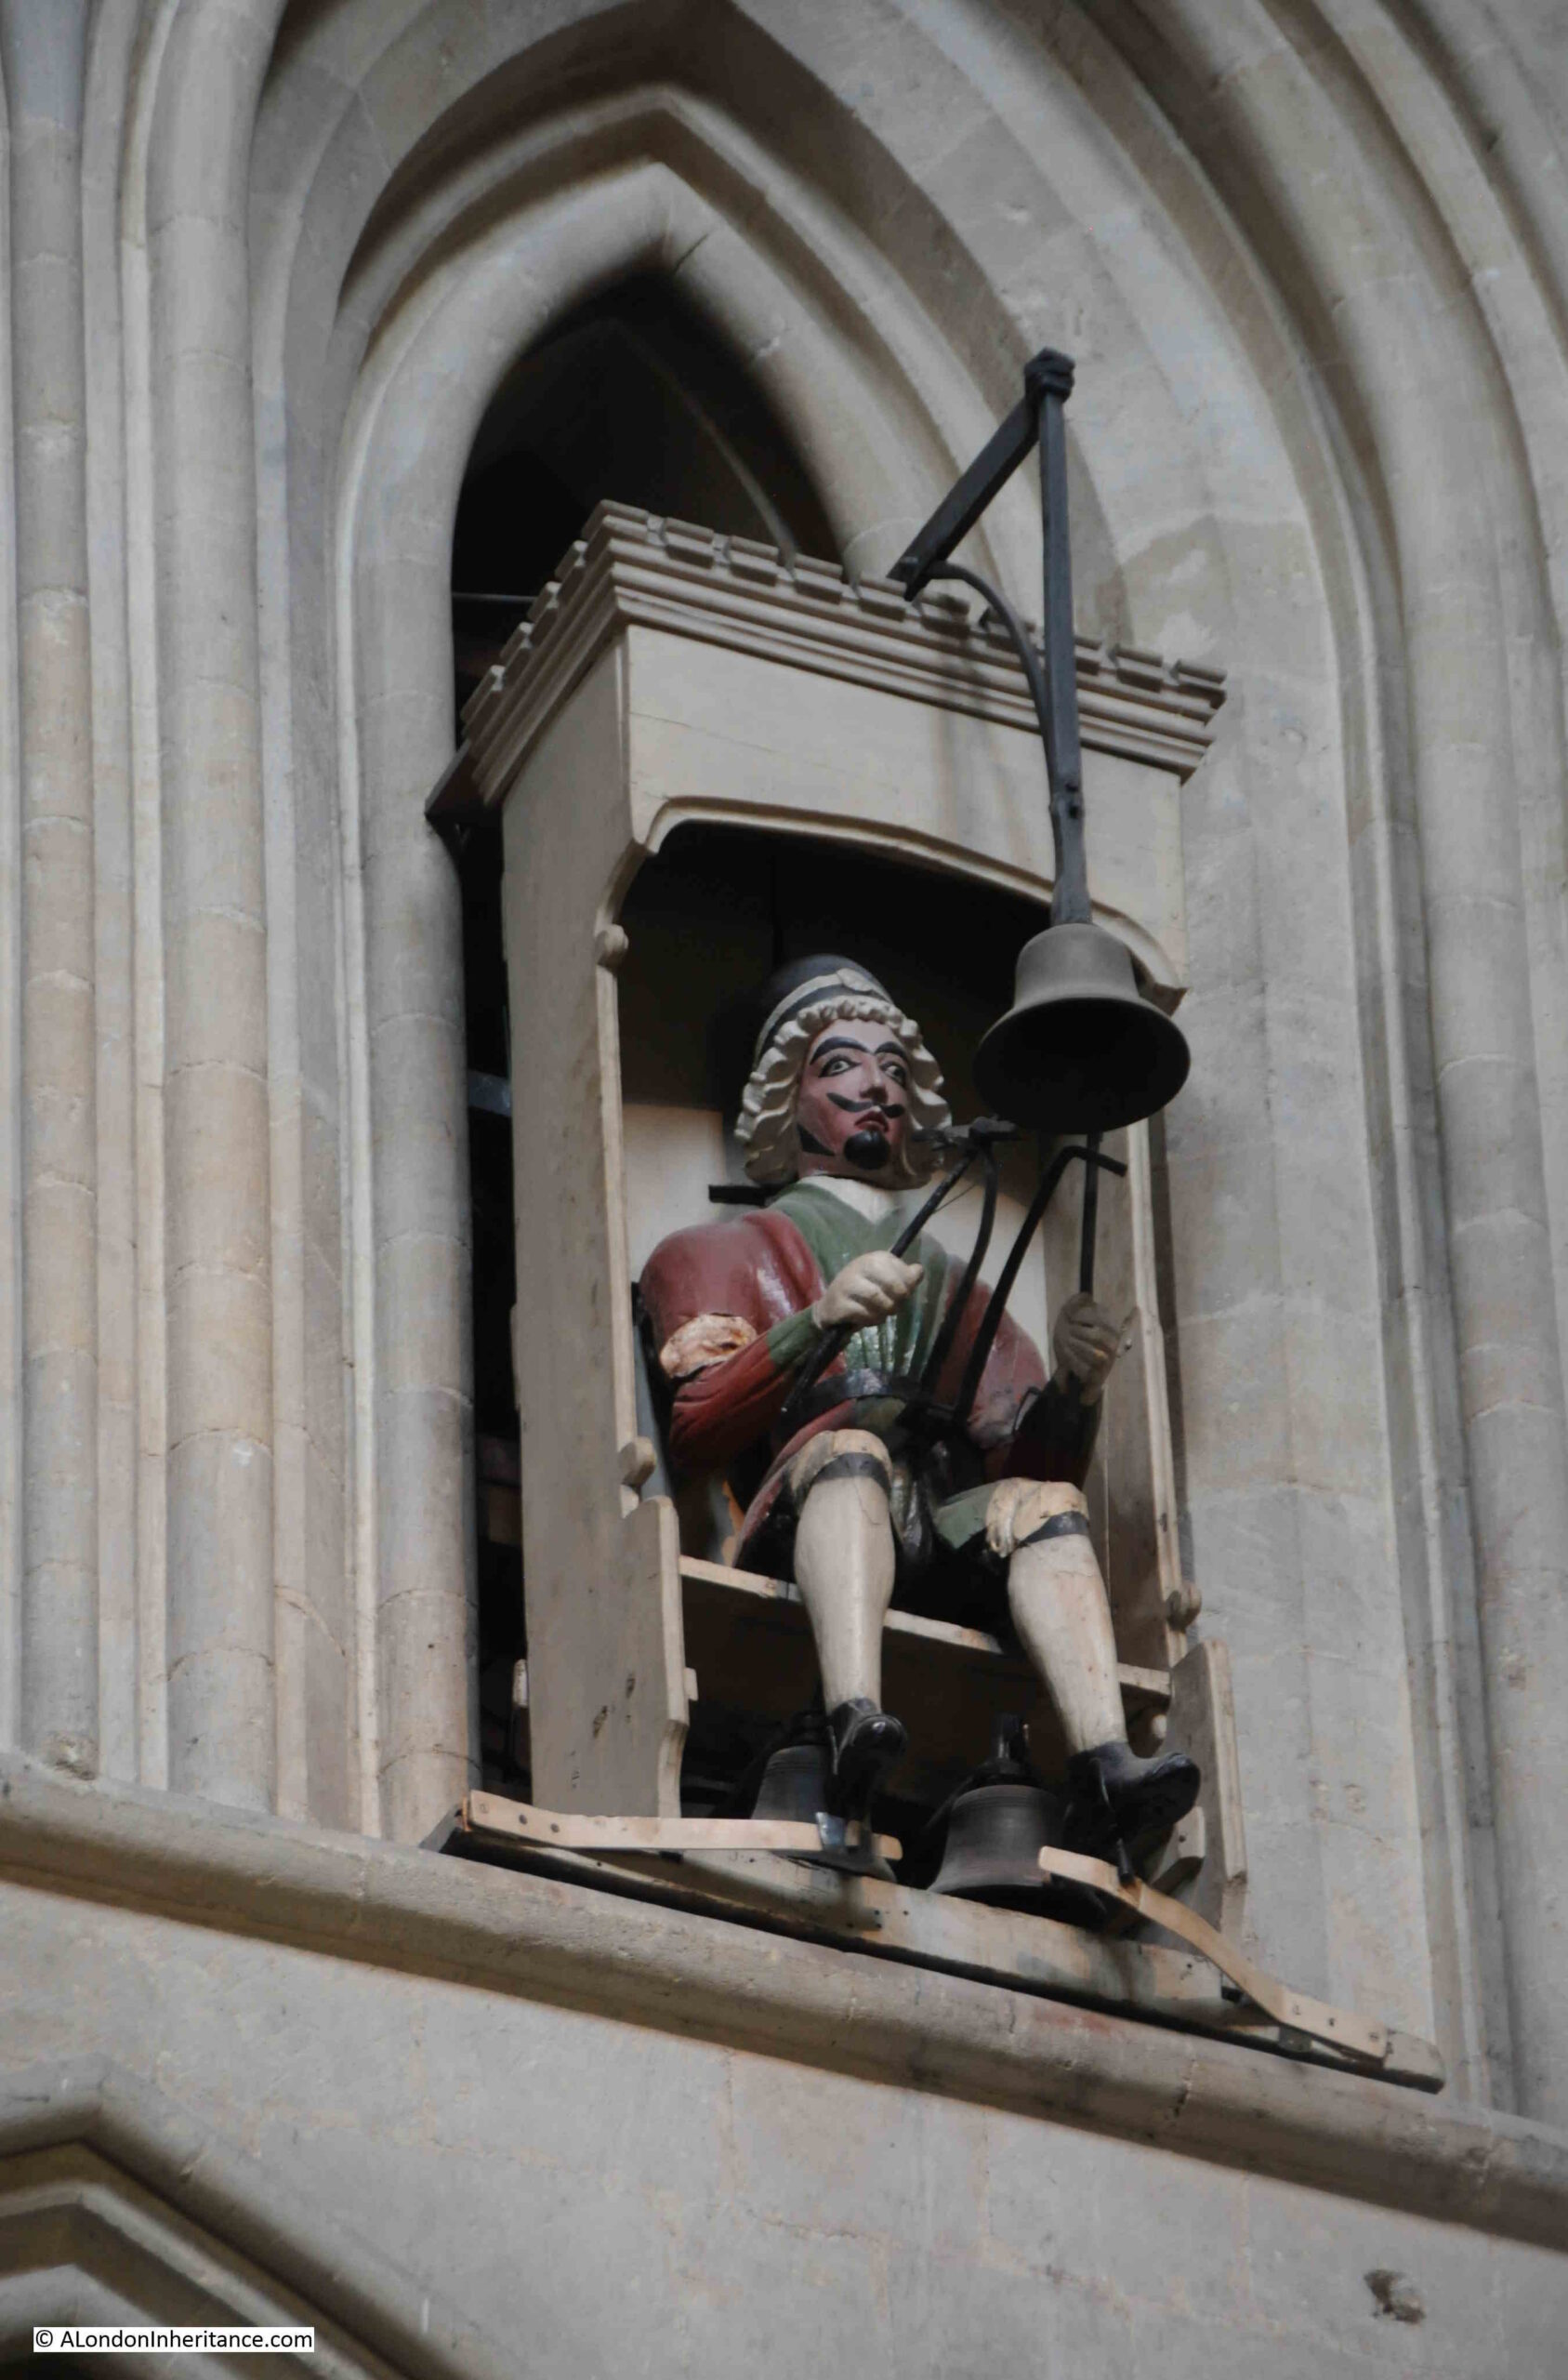 Wells Cathedral clock